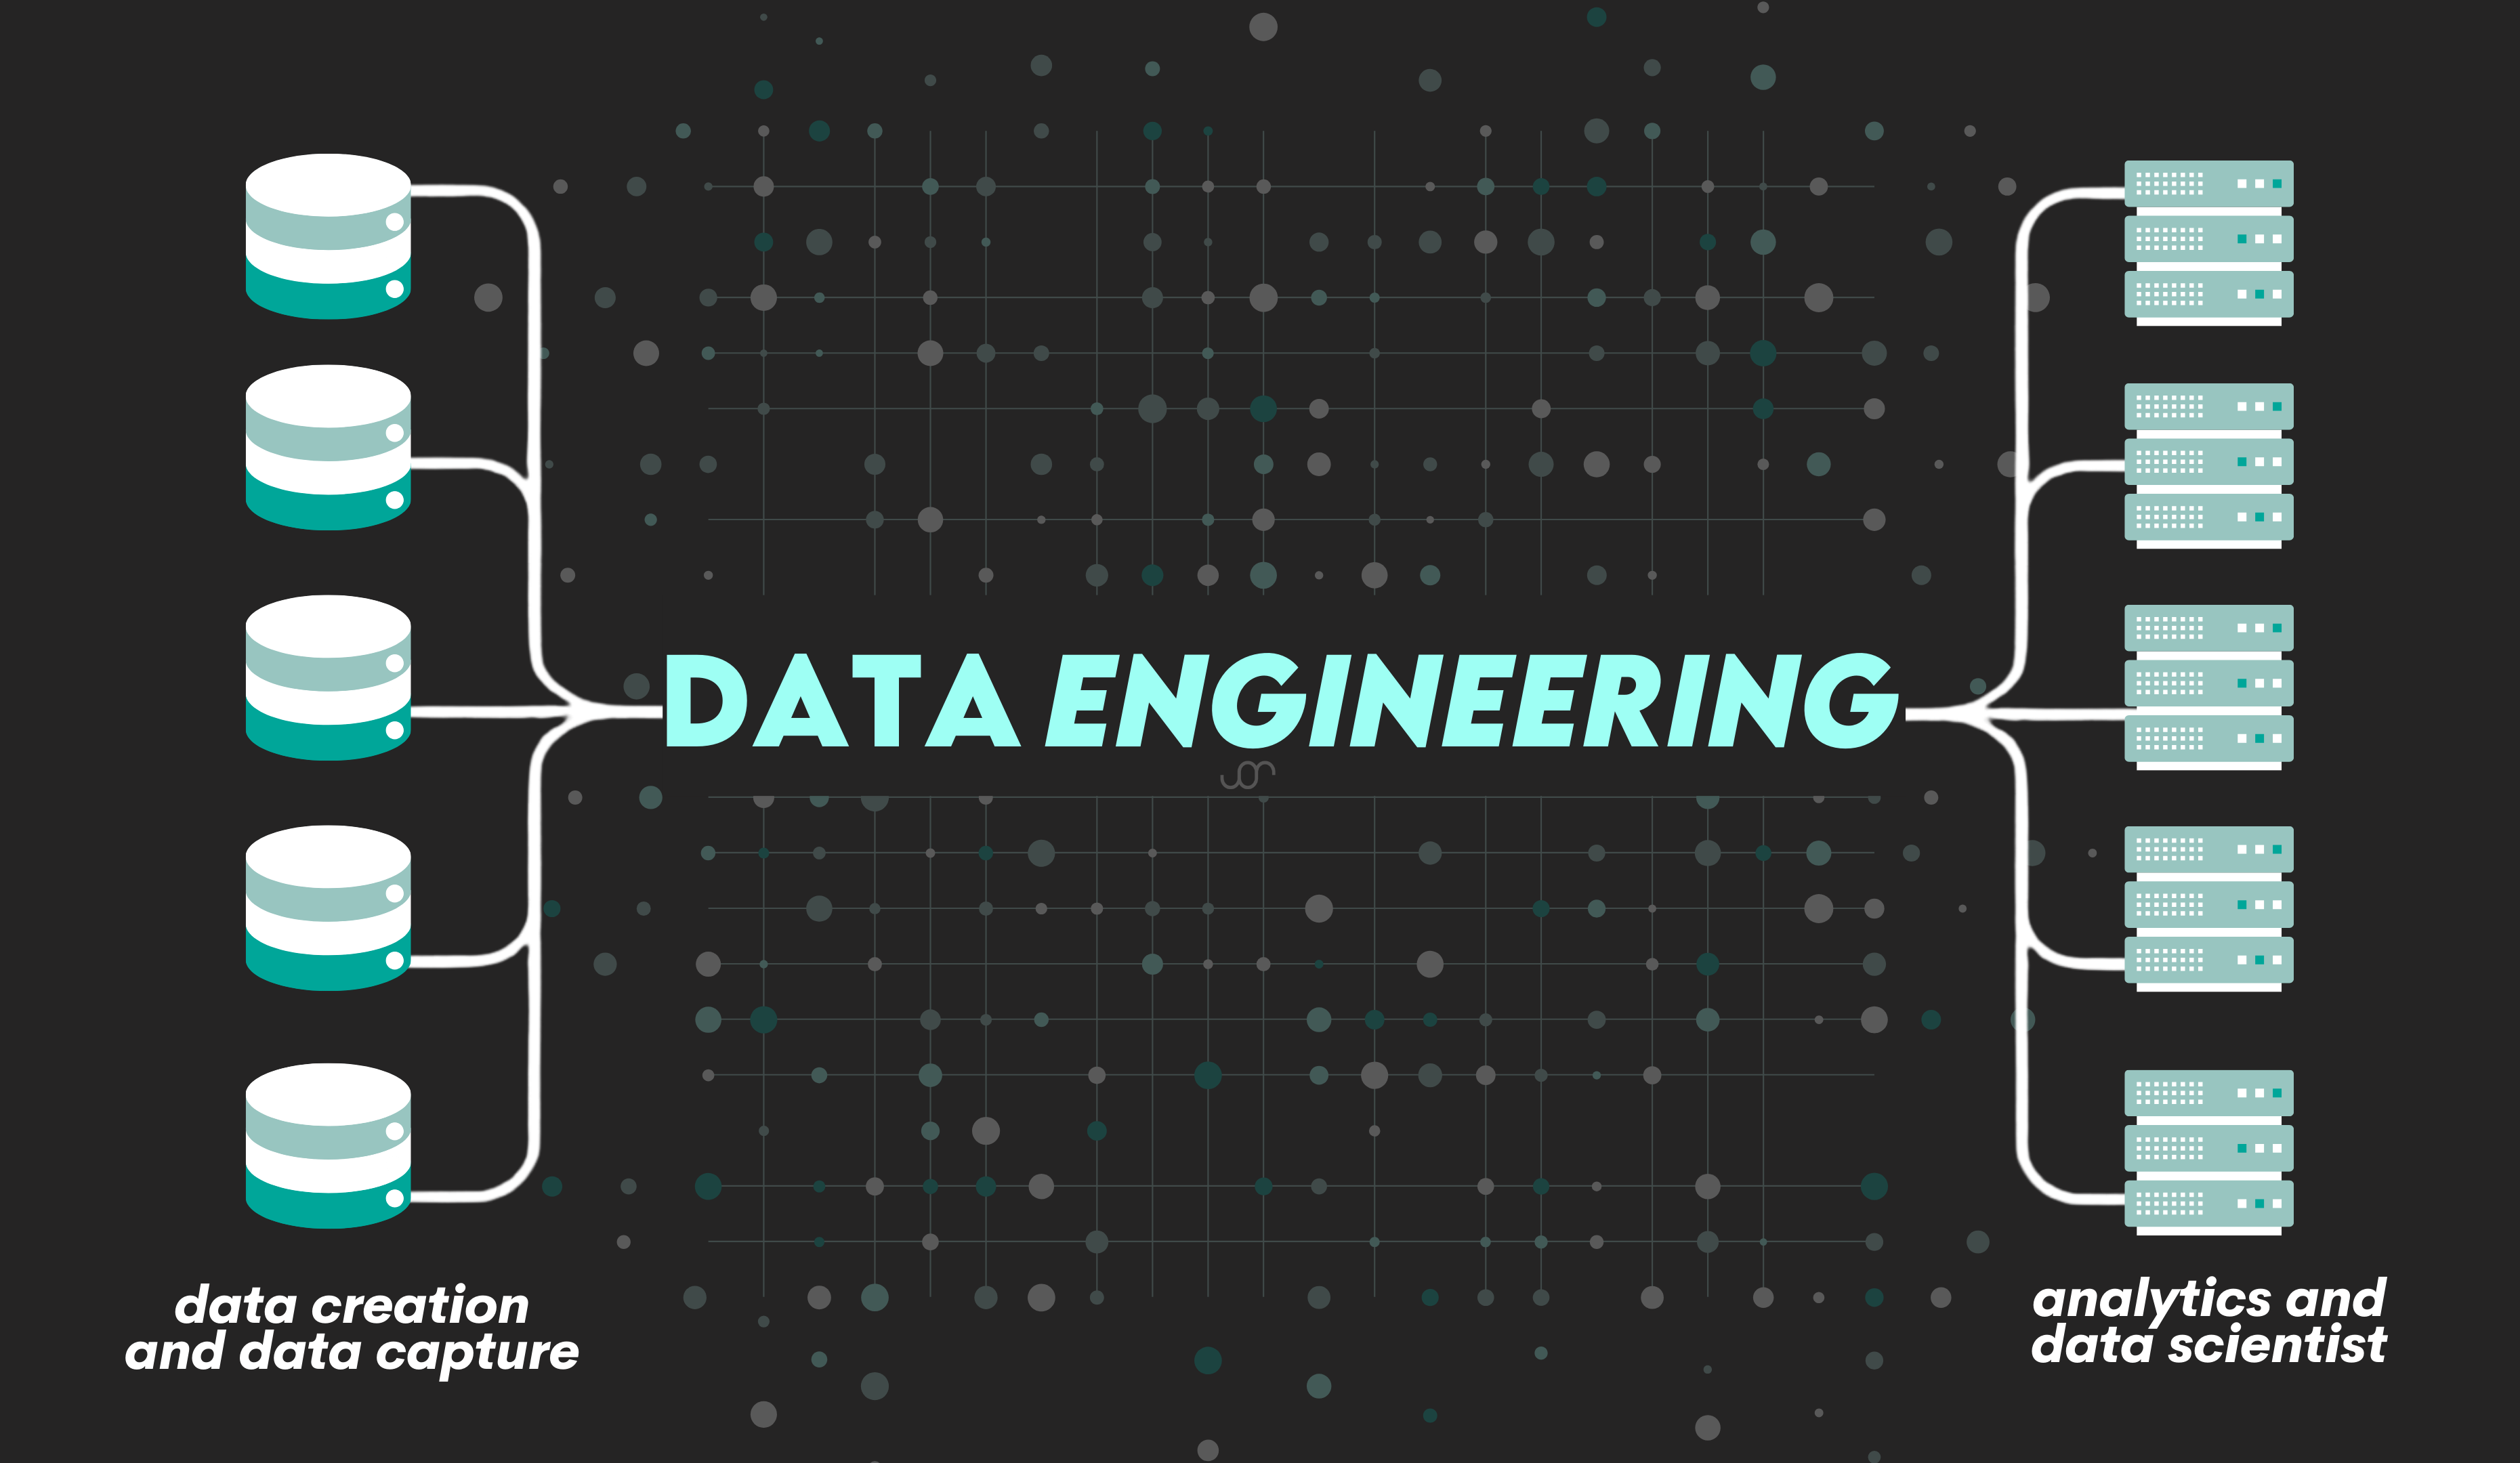 Data Engineer as one of the Data Science specializations